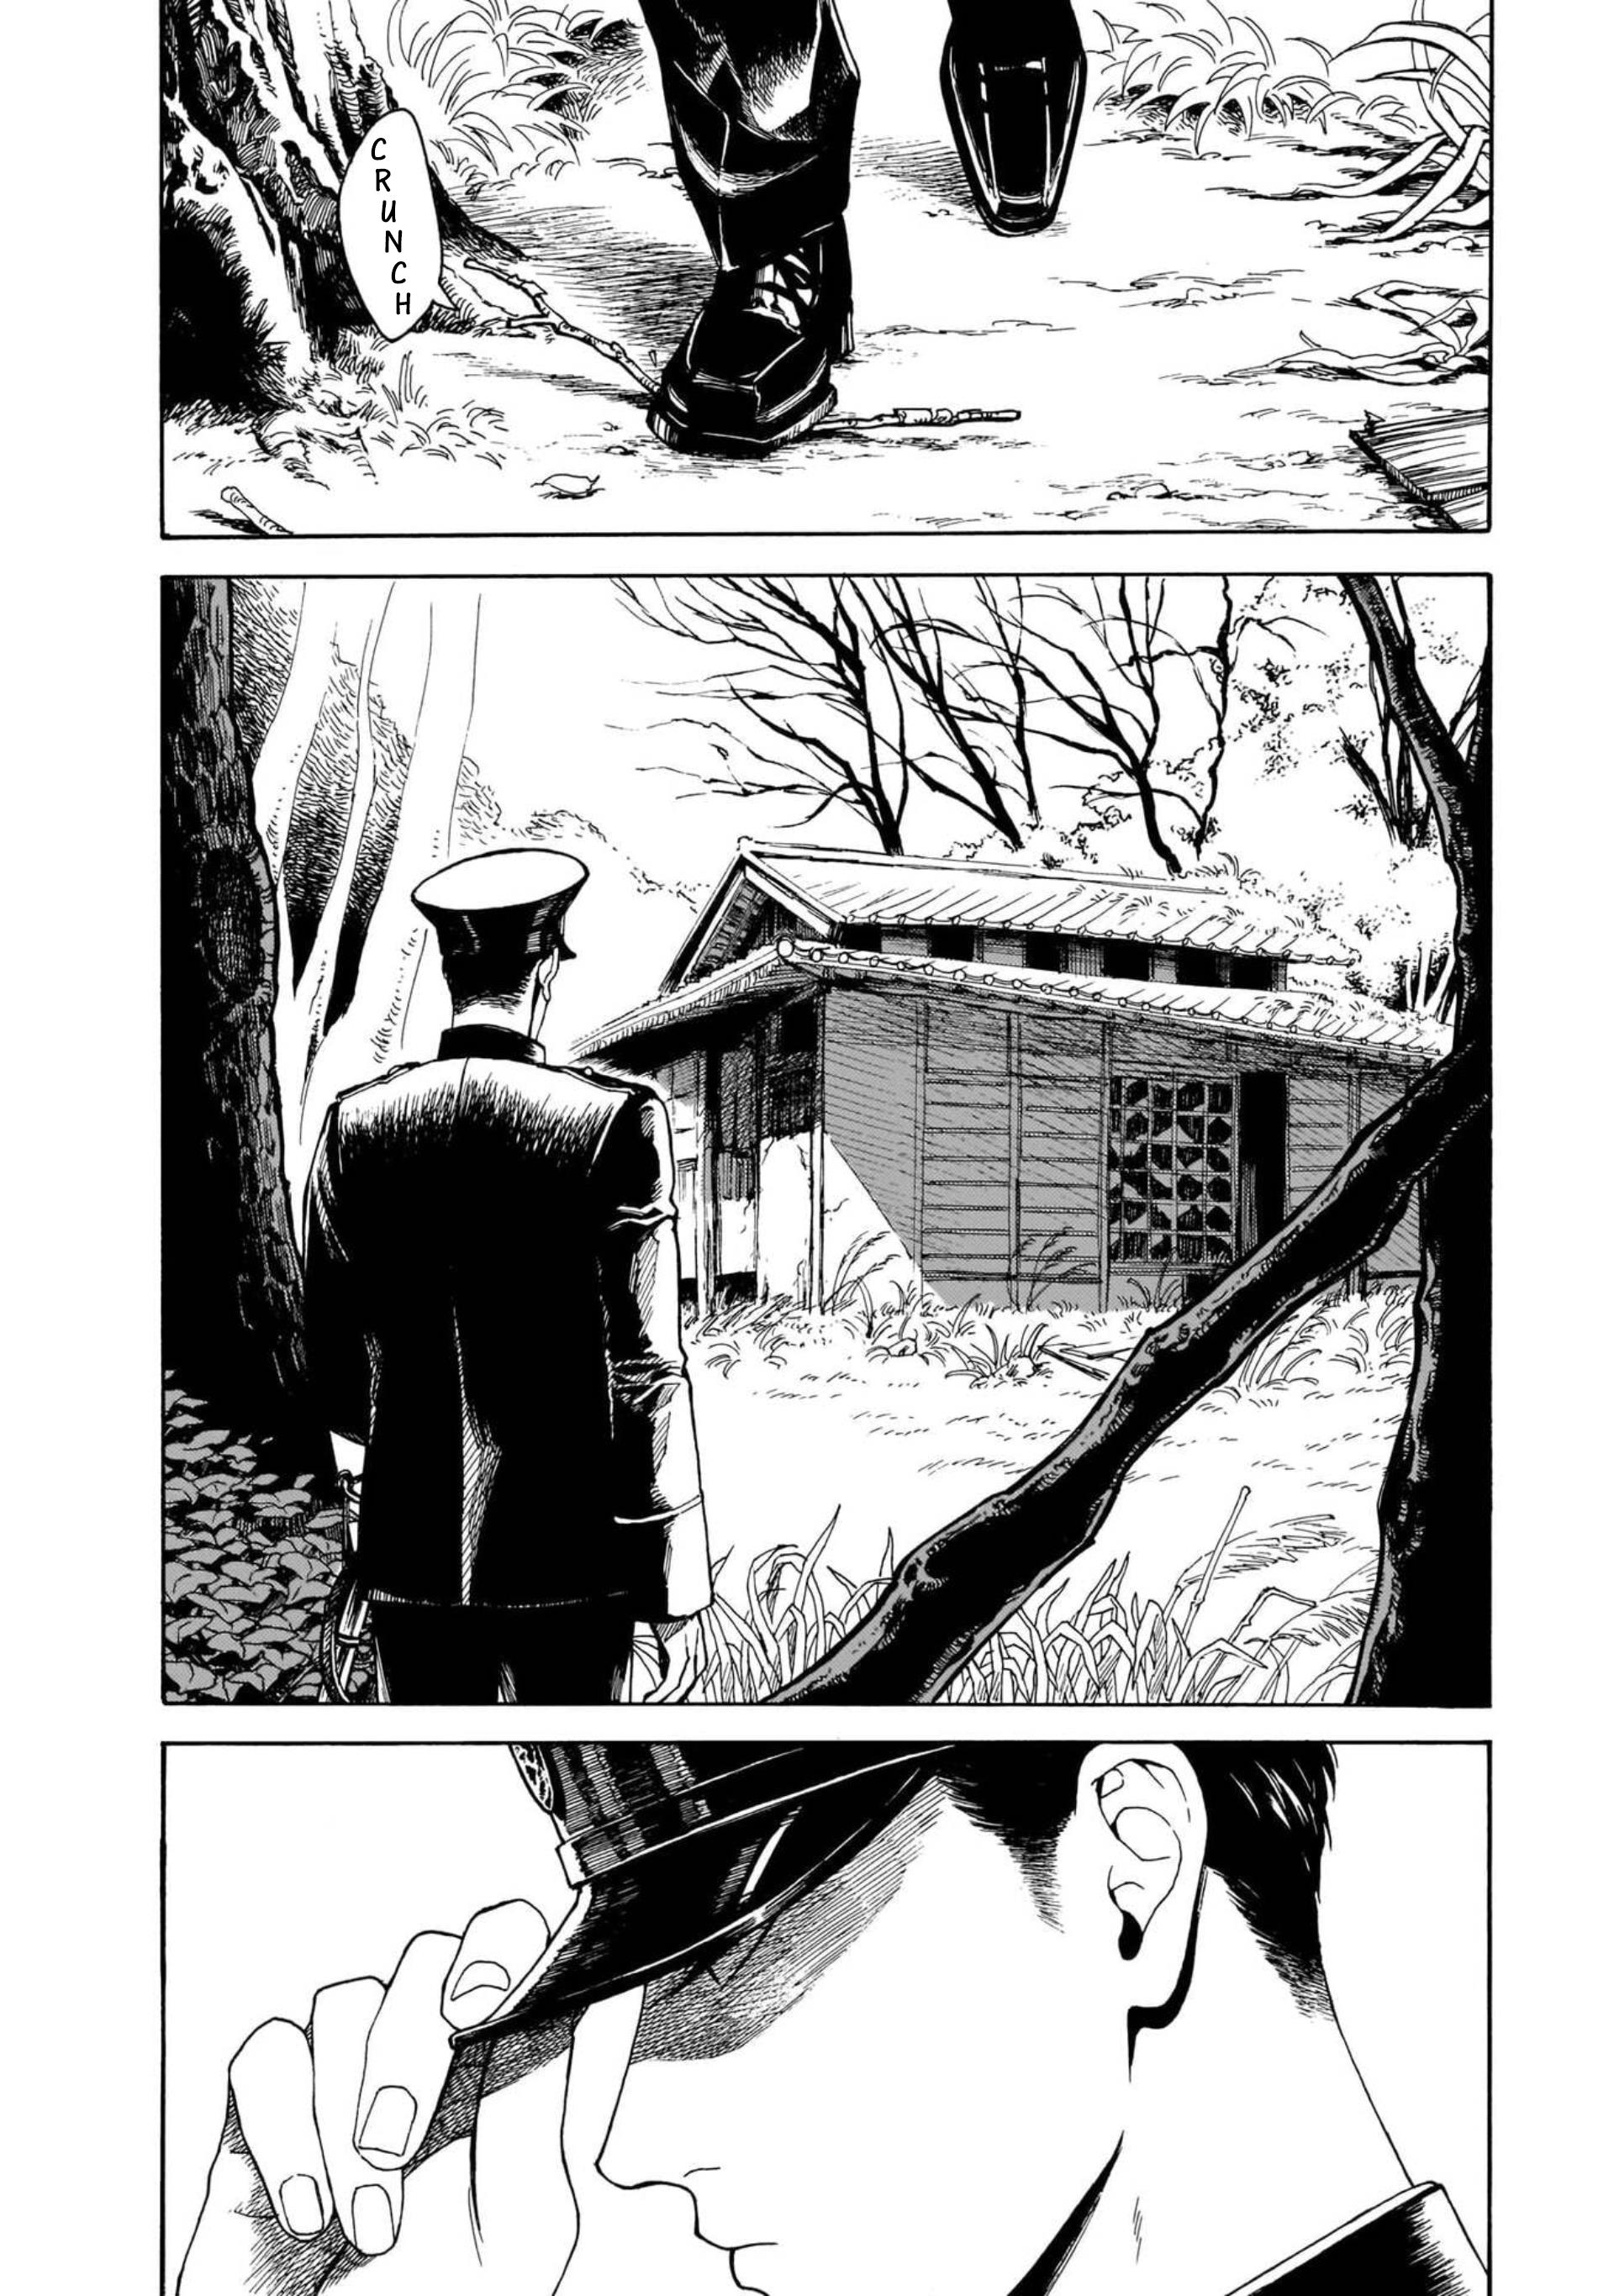 Dazed And Confused Vol.1 Chapter 3: Tsukumo Kitan (By Ameishi) - Picture 2